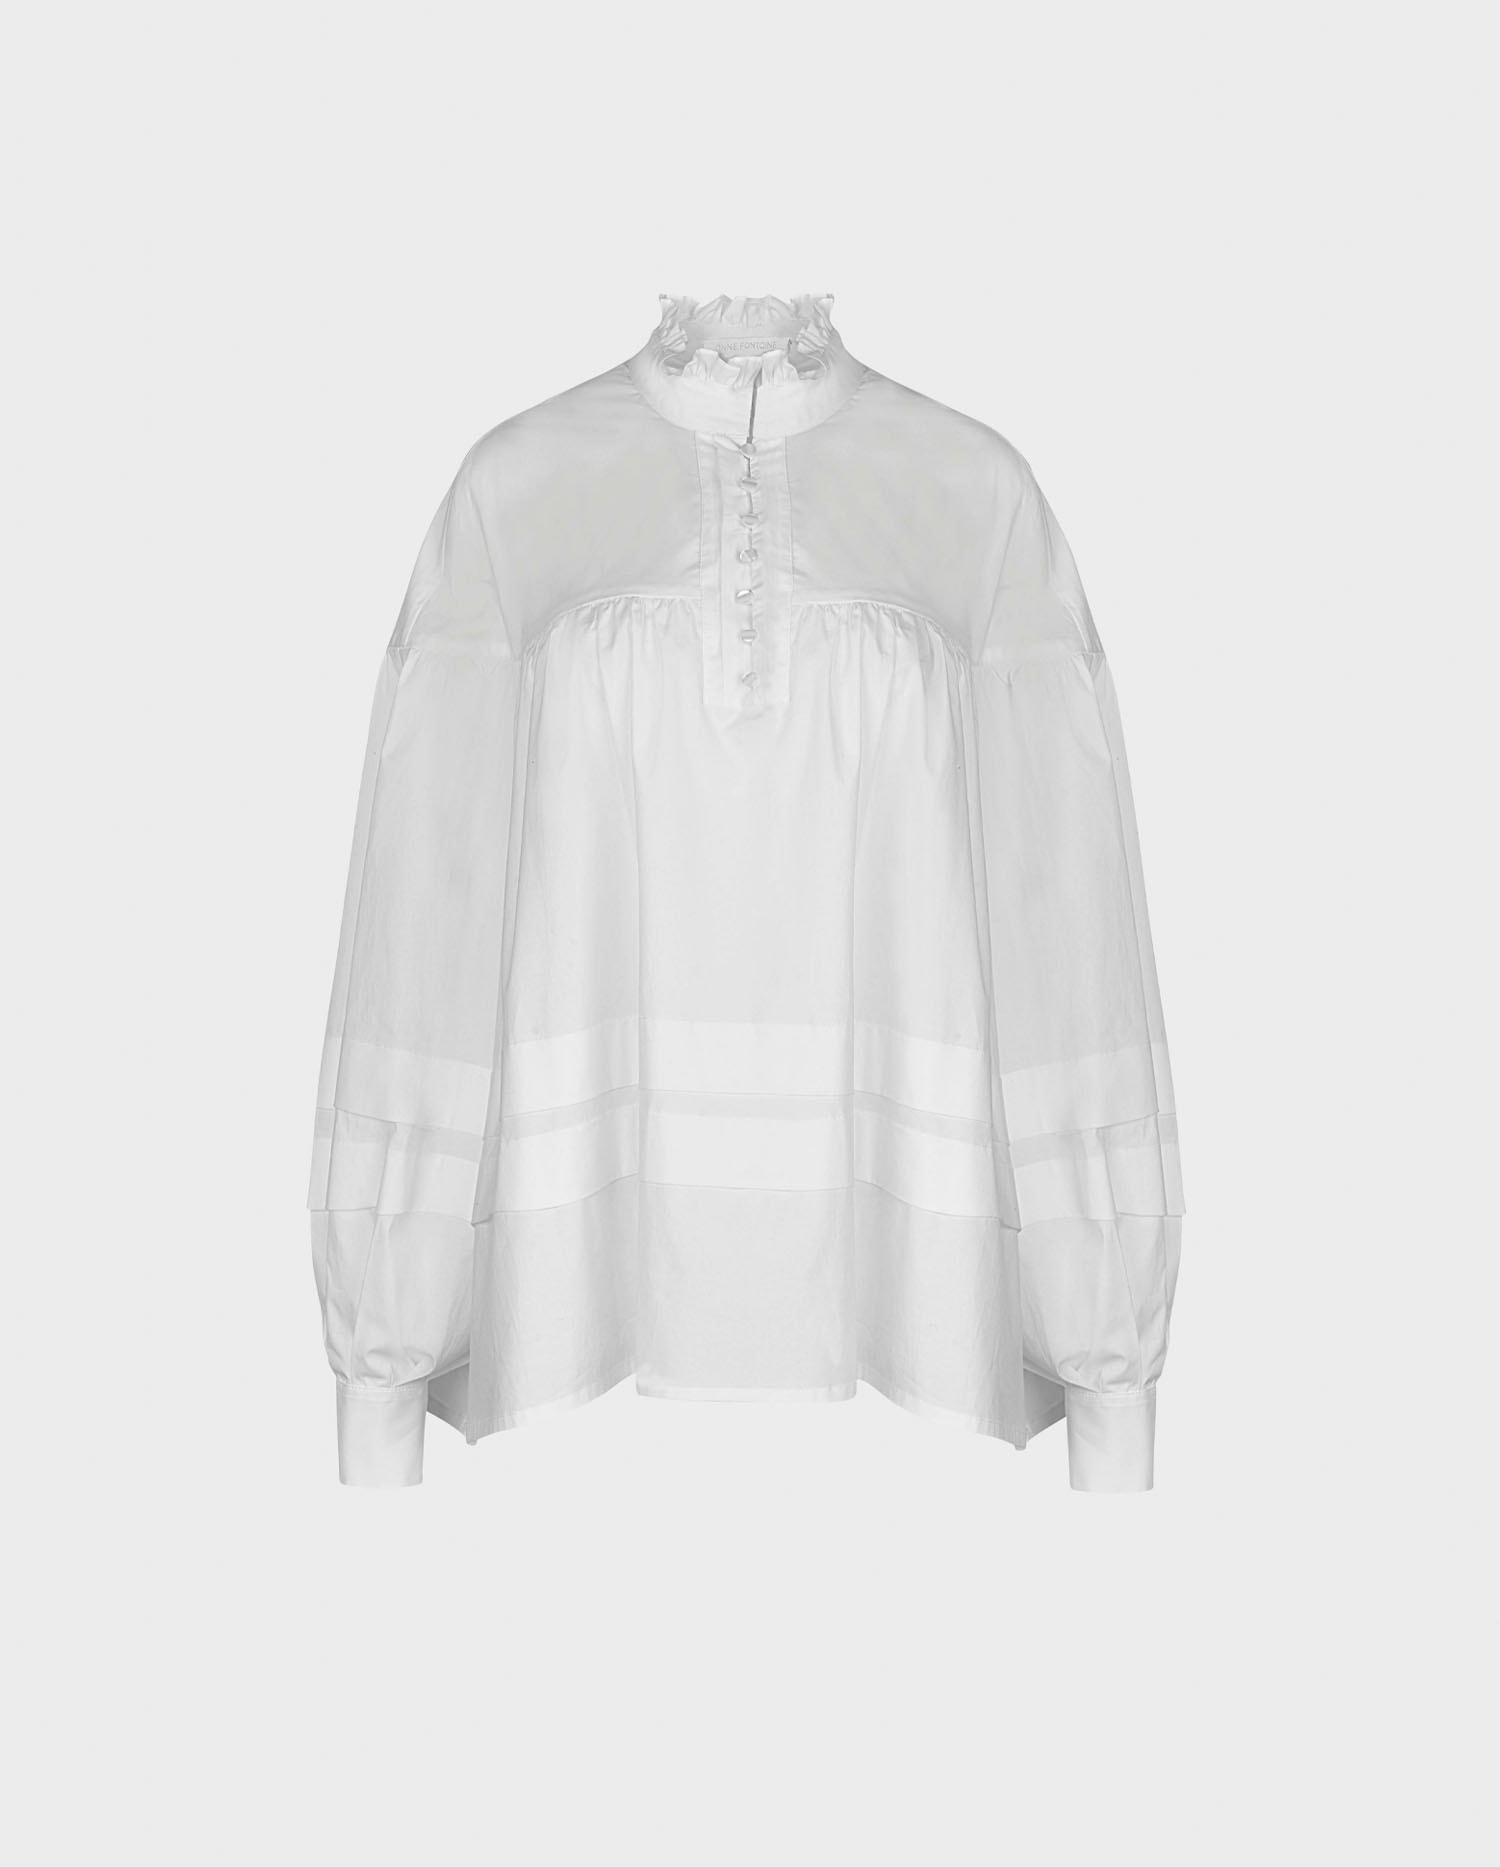 Discover The AMANTINE Long sleeve white shirt with half-button placket and double horizontal overlay flaps from ANNE FONTAINE